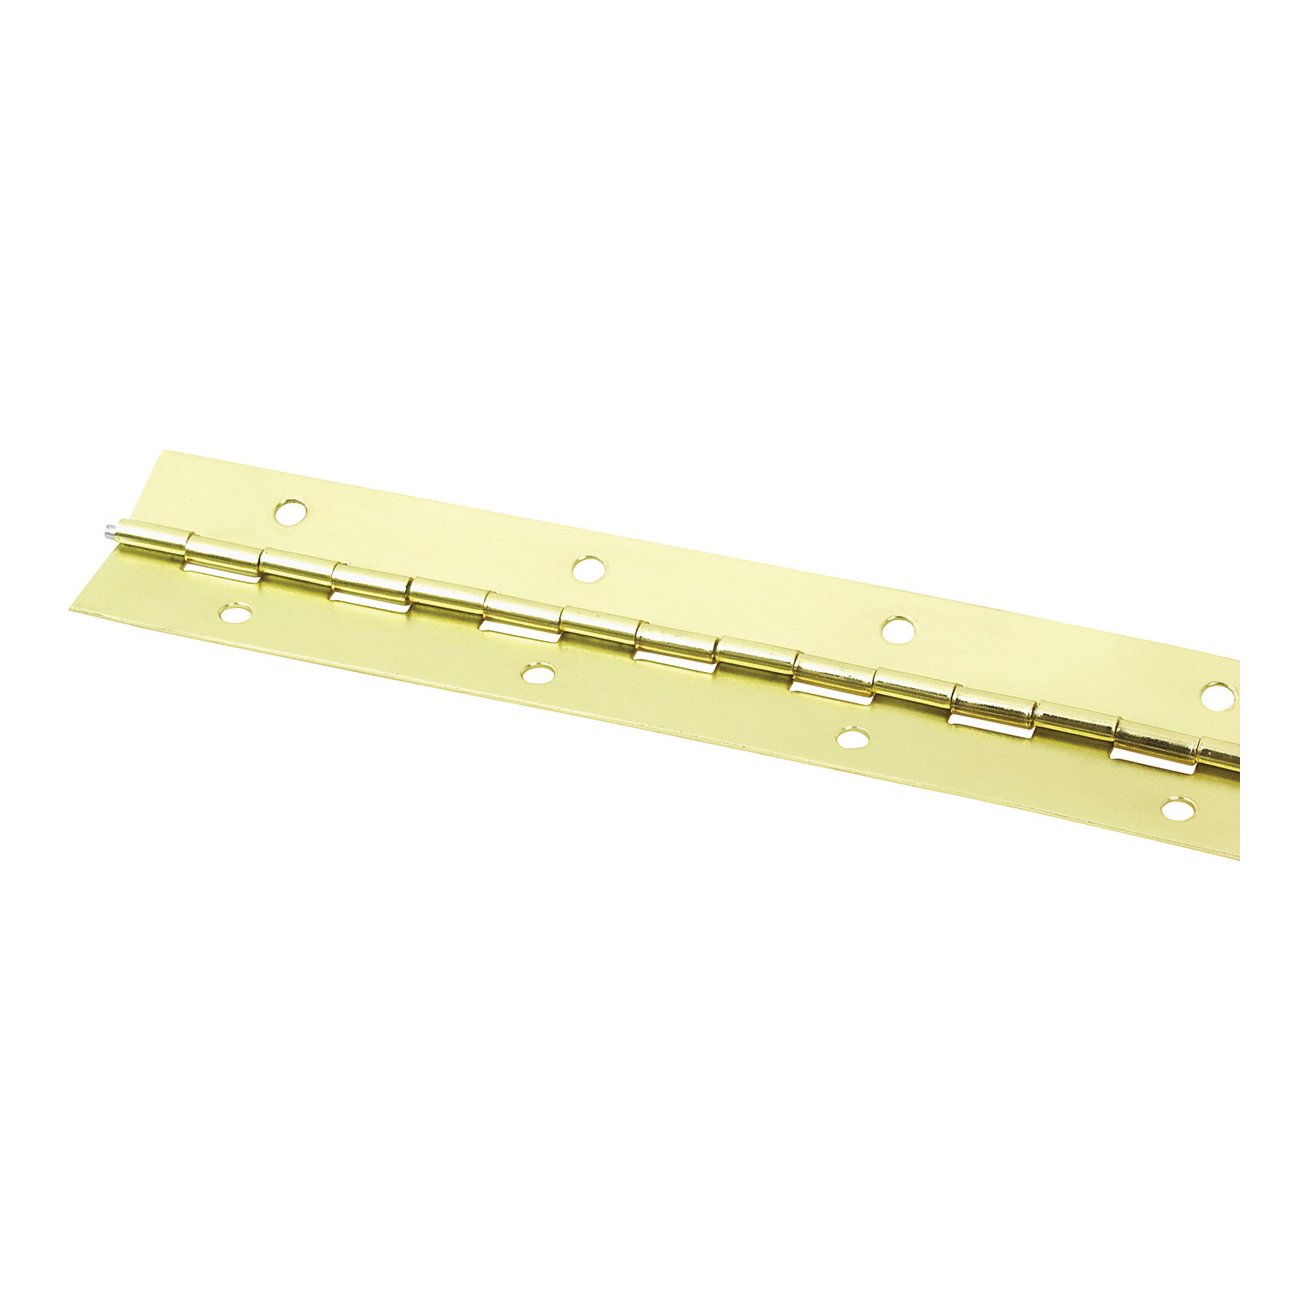 Continuous Hinge, 180 deg, Steel, Bright Brass, 1.5 in x 48 in